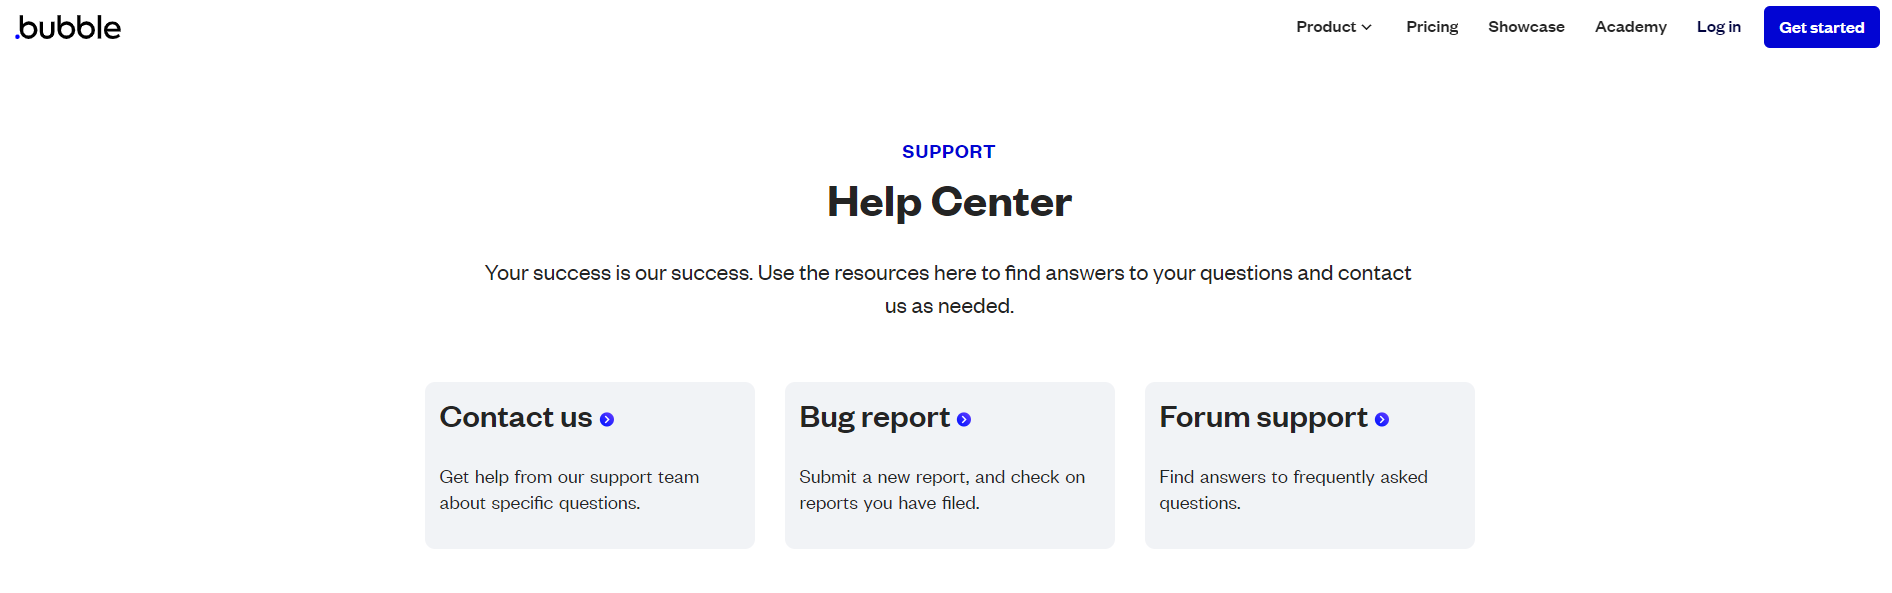 Bubble Customer Support